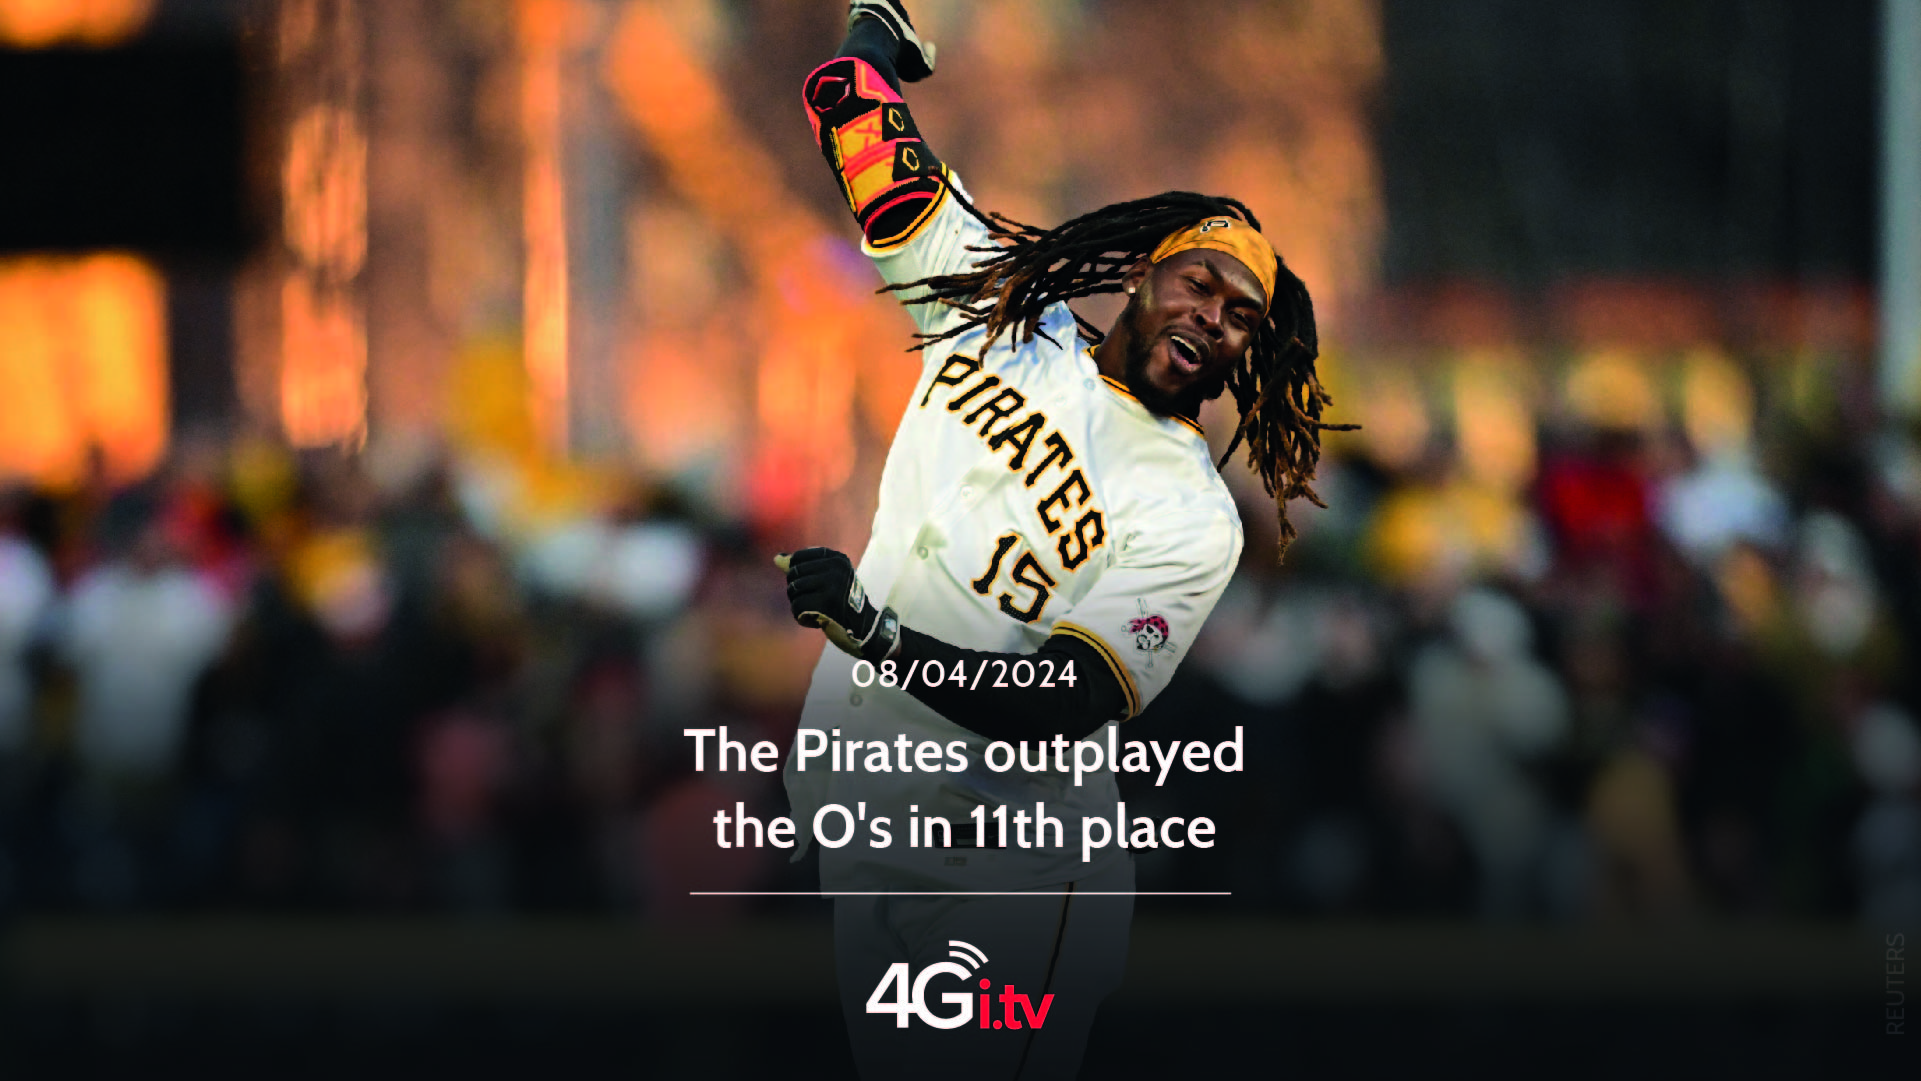 Подробнее о статье The Pirates outplayed the O’s in 11th place 